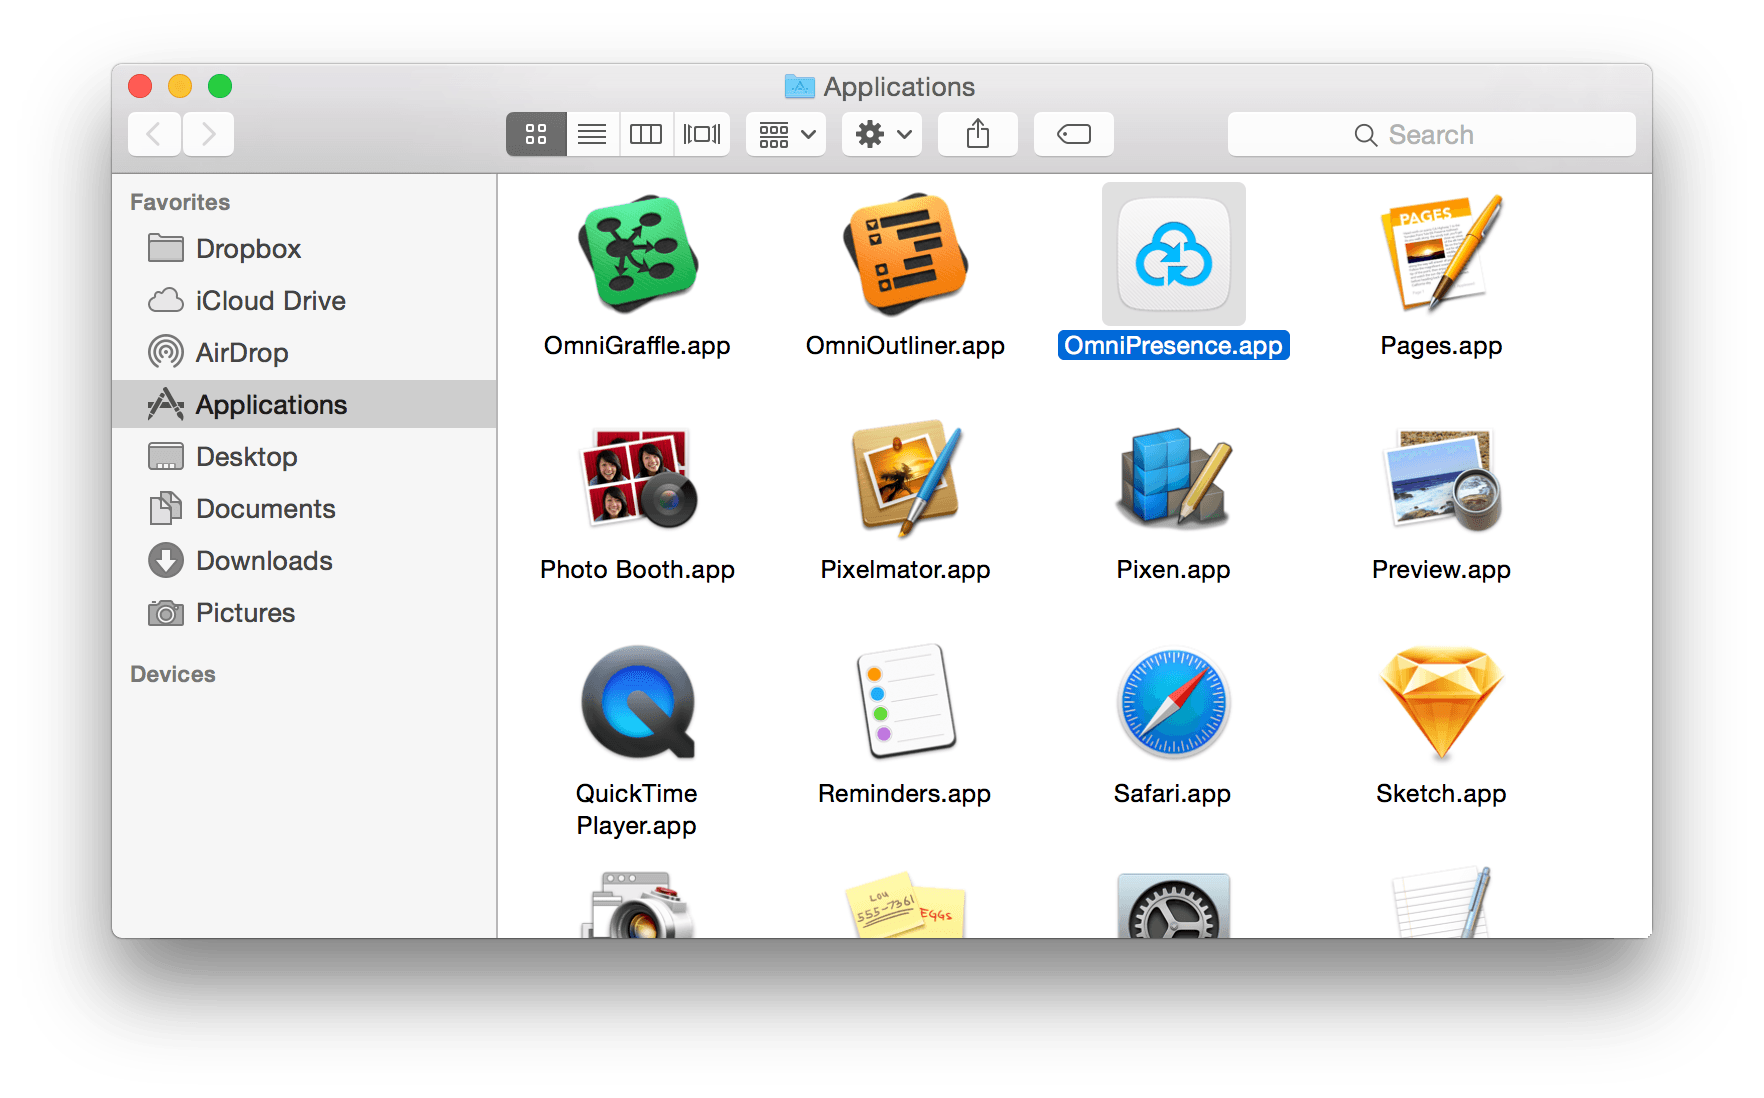 Open a Finder window and choose the Applications folder in the sidebar.